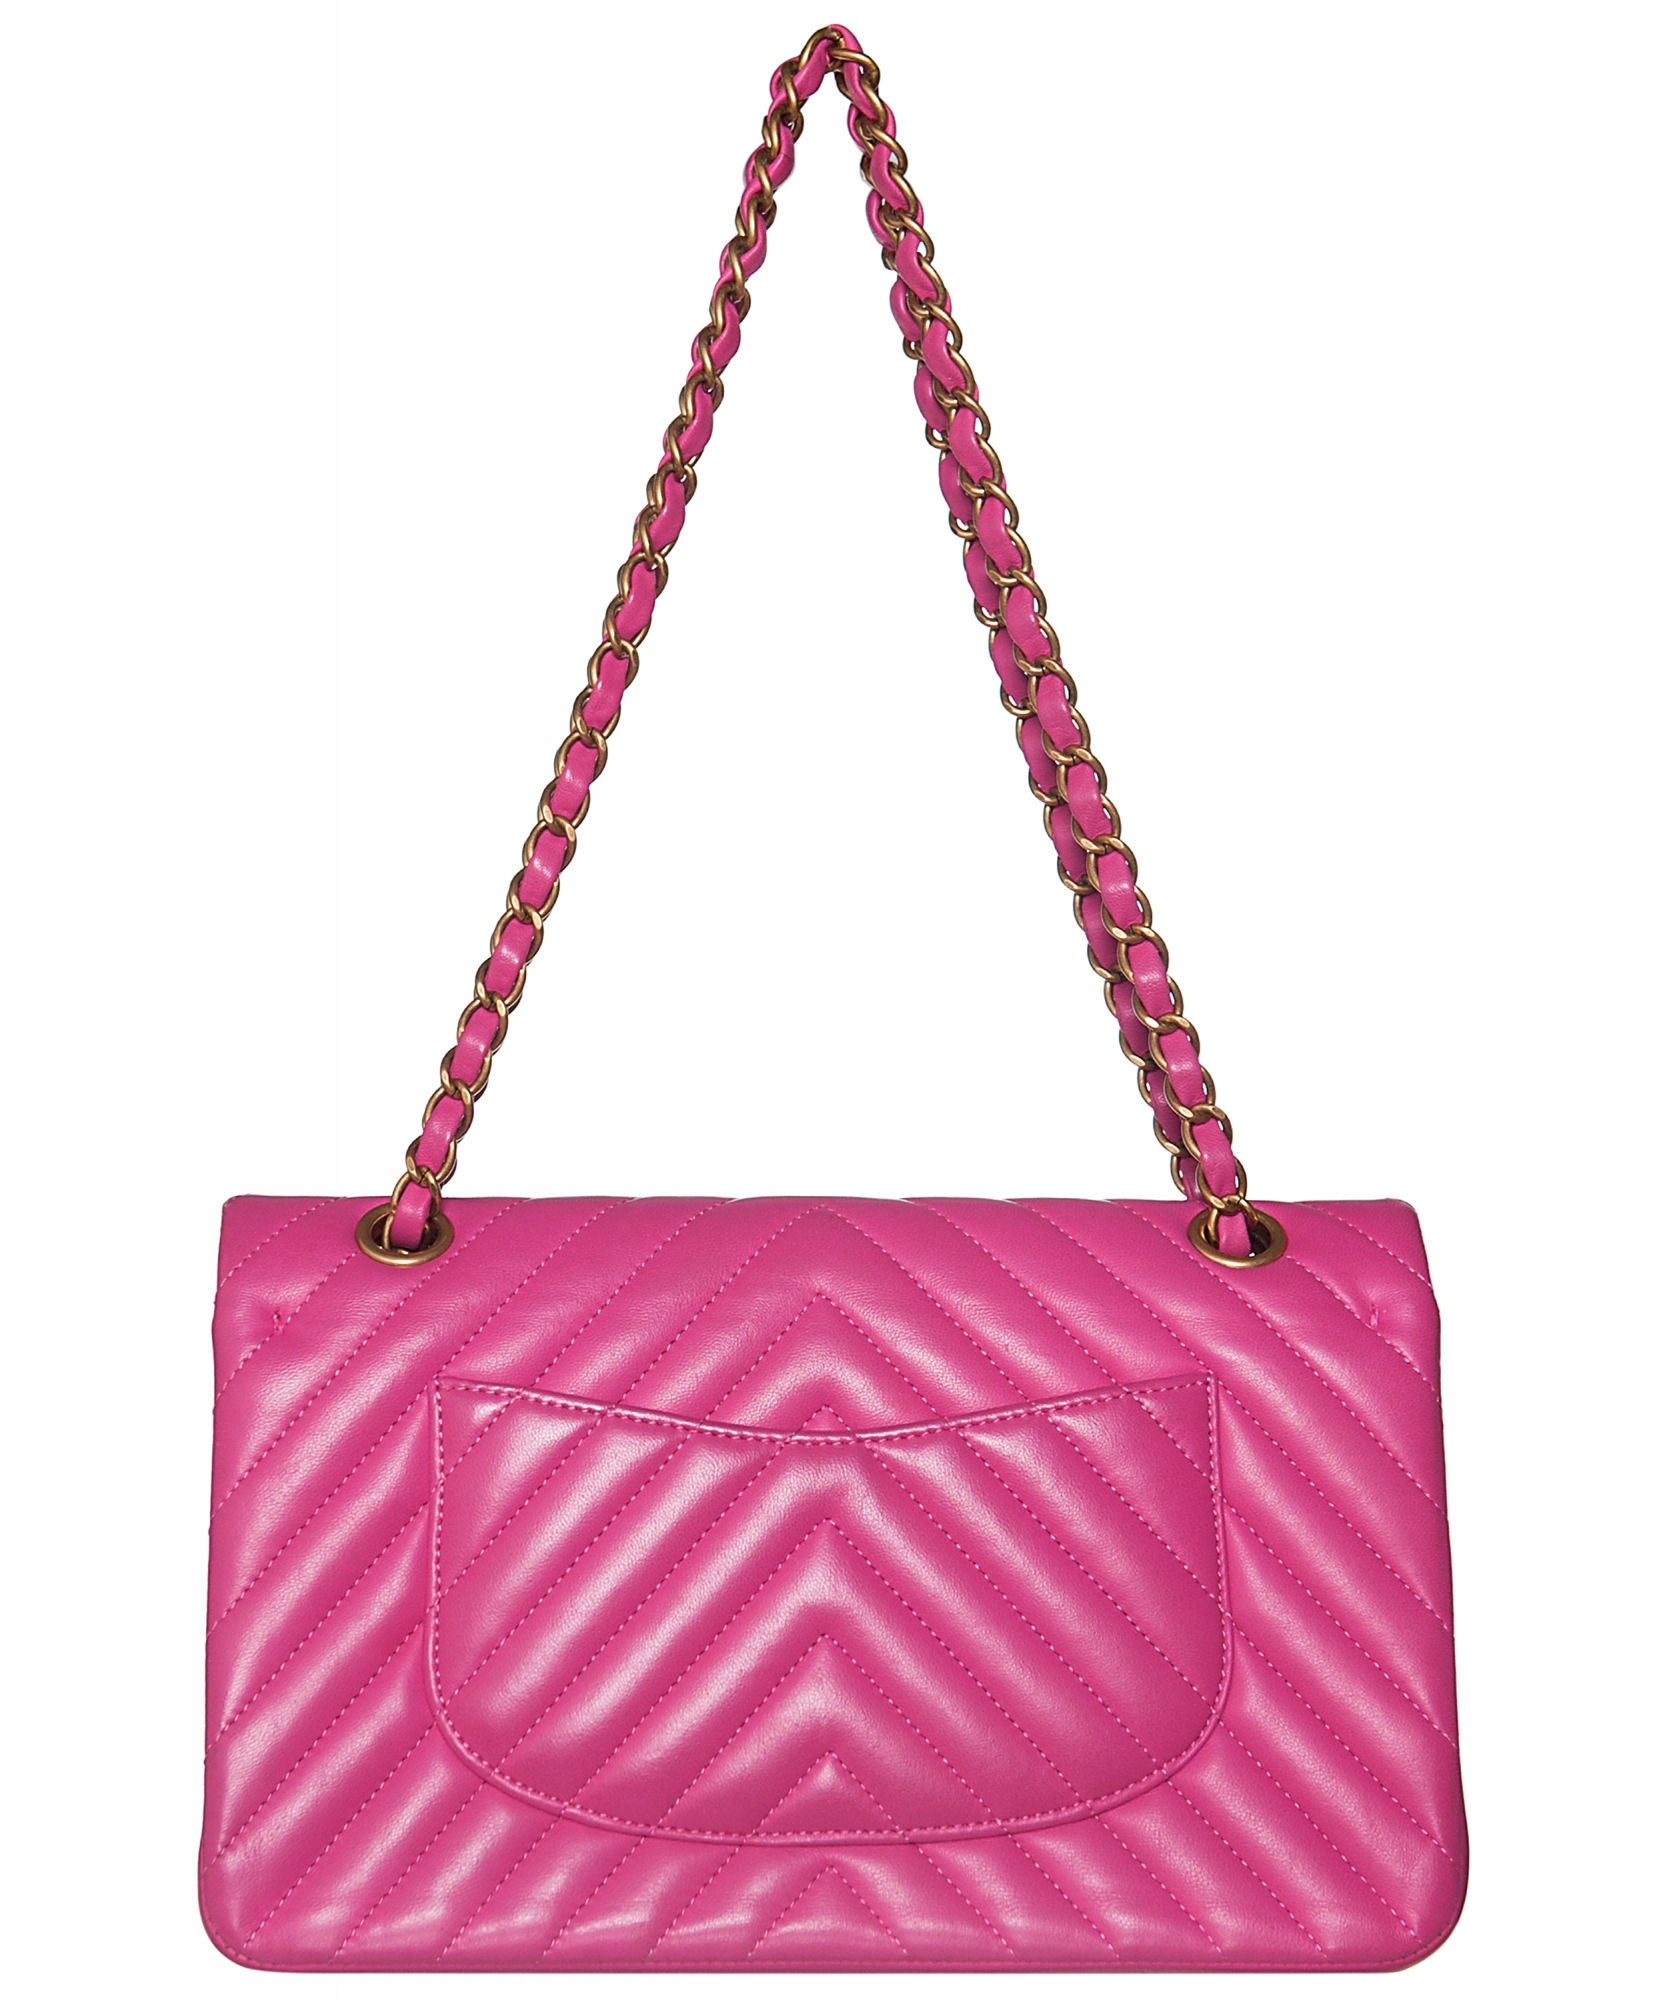 chanel double flap bag pink